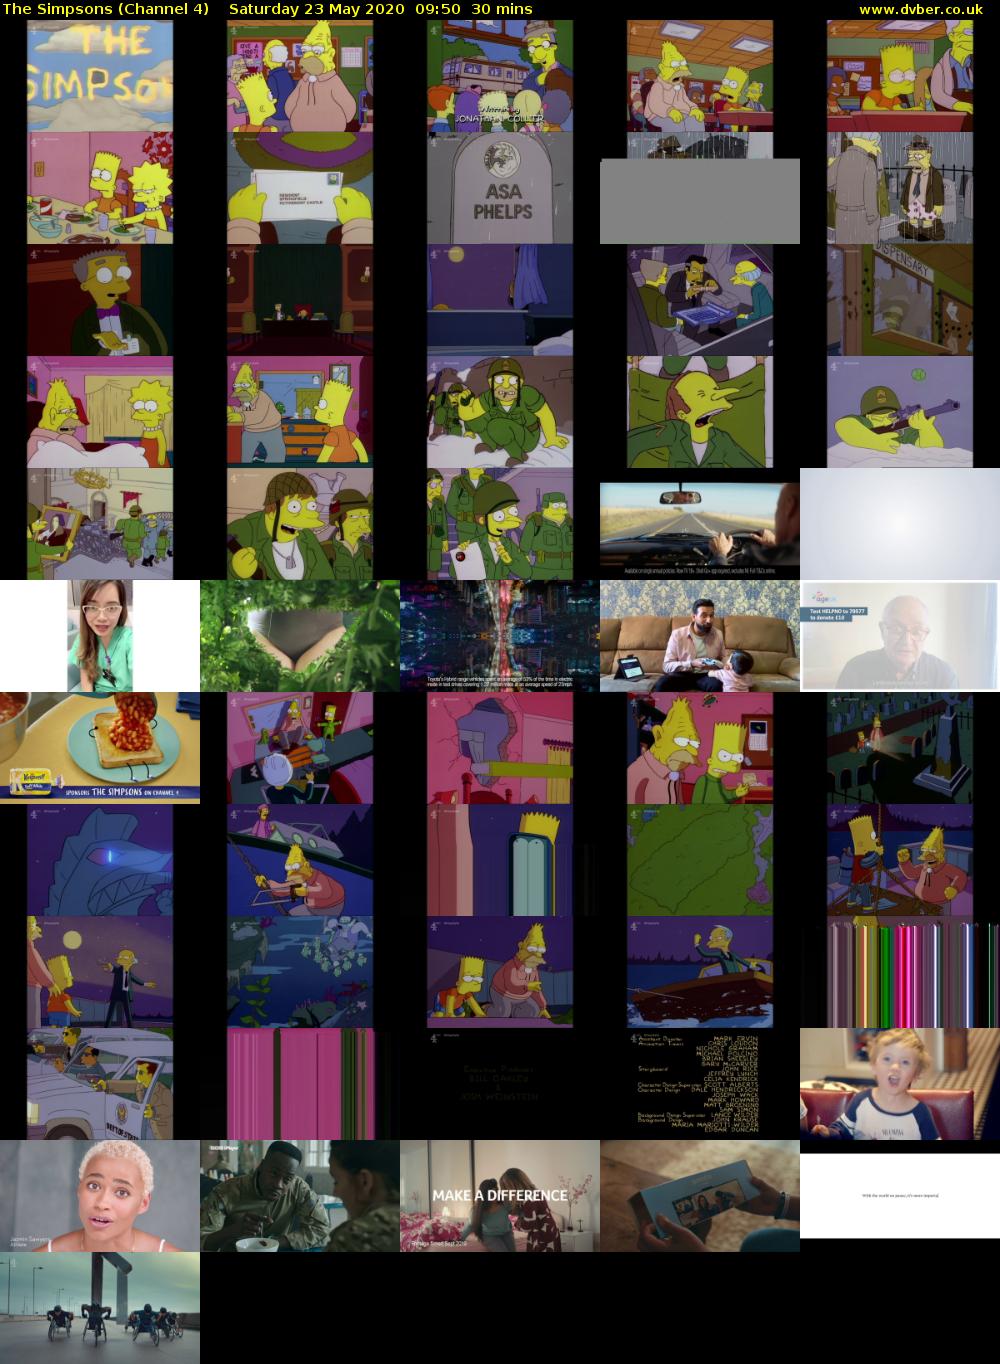 The Simpsons (Channel 4) Saturday 23 May 2020 09:50 - 10:20